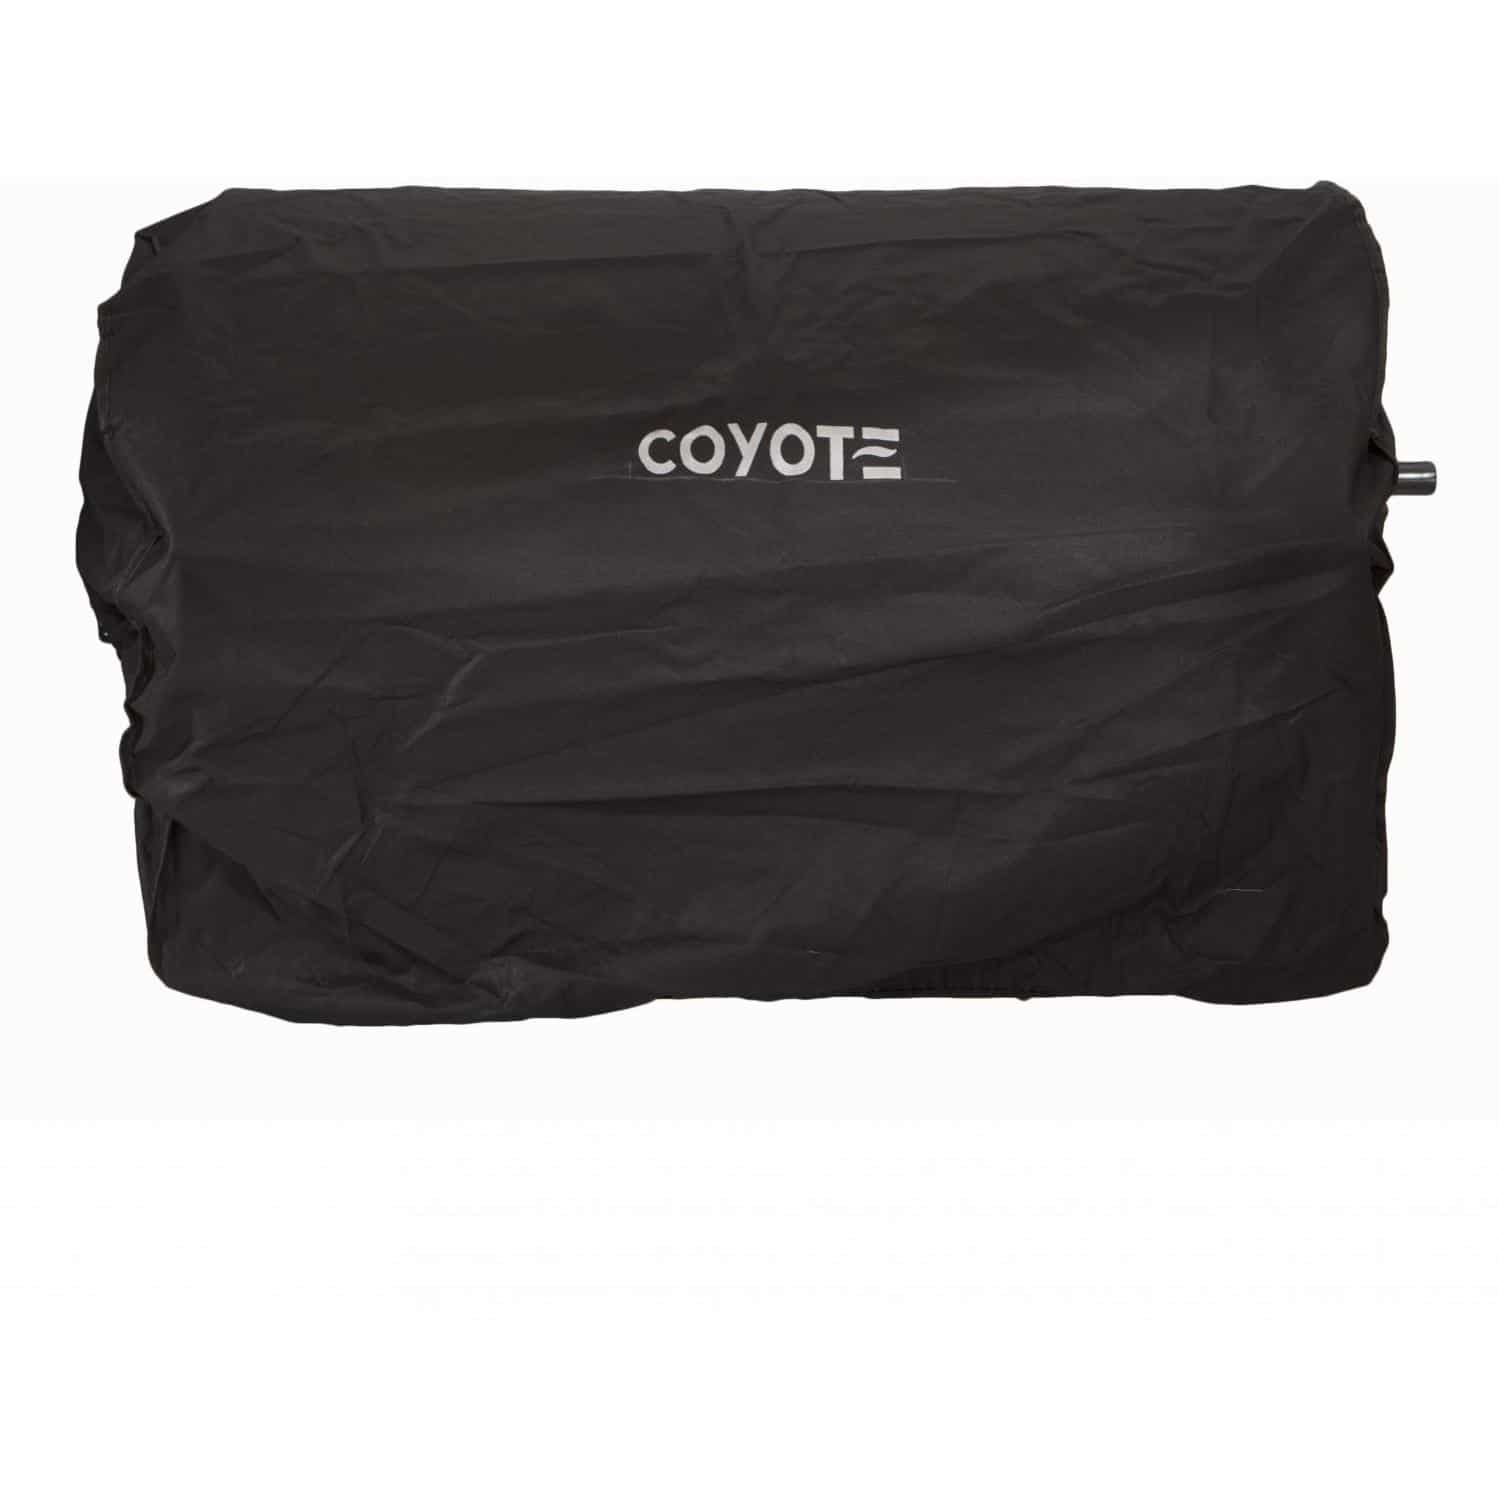 Coyote Built-In Cover for 30" Grill Coyote Indigo Pool Patio BBQ